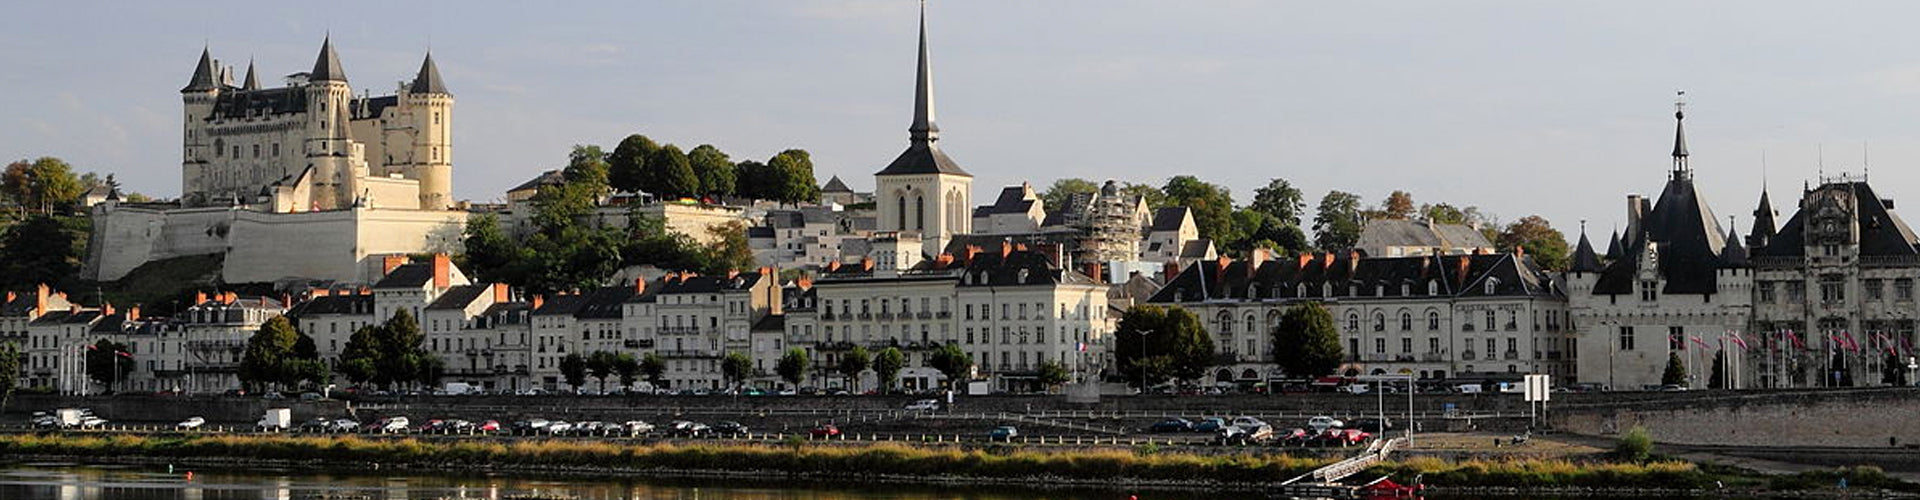 The Historic Town of Saumur in the Loire Valley, France